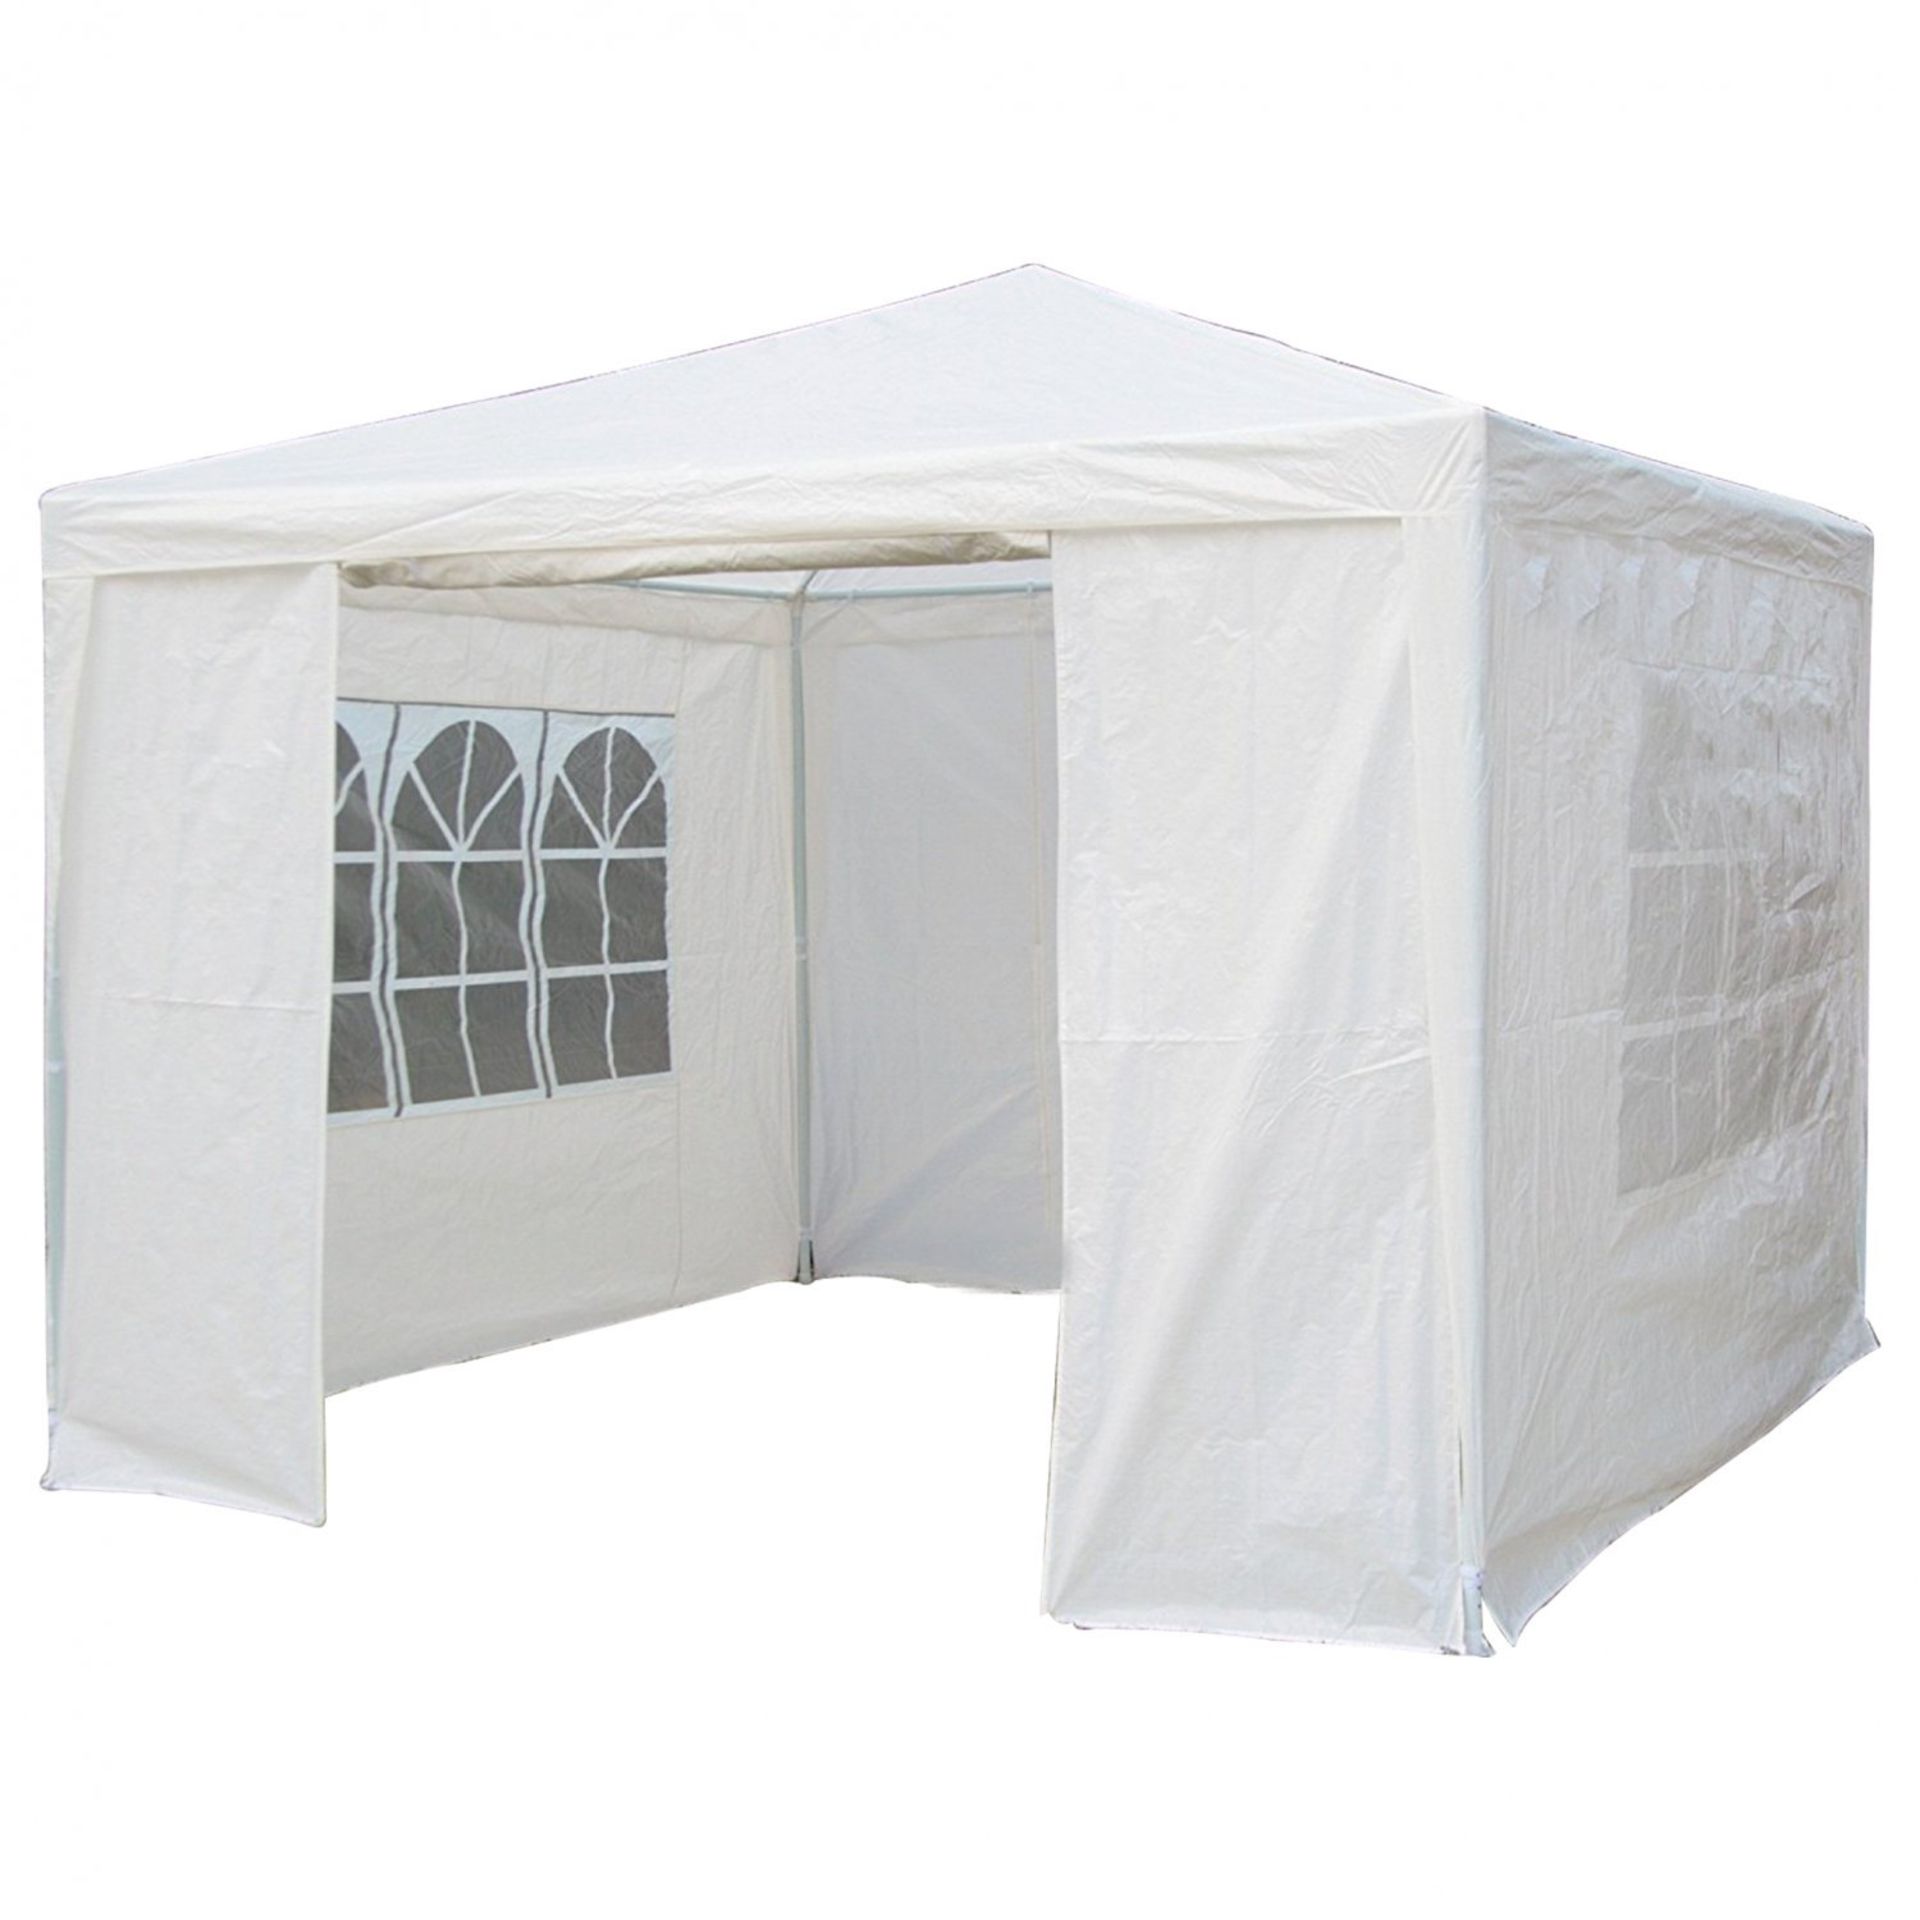 (EE513) 3m x 3m White Waterproof Garden Gazebo Marquee Awning Tent Zipped Door & 2 Removable W... - Image 2 of 3